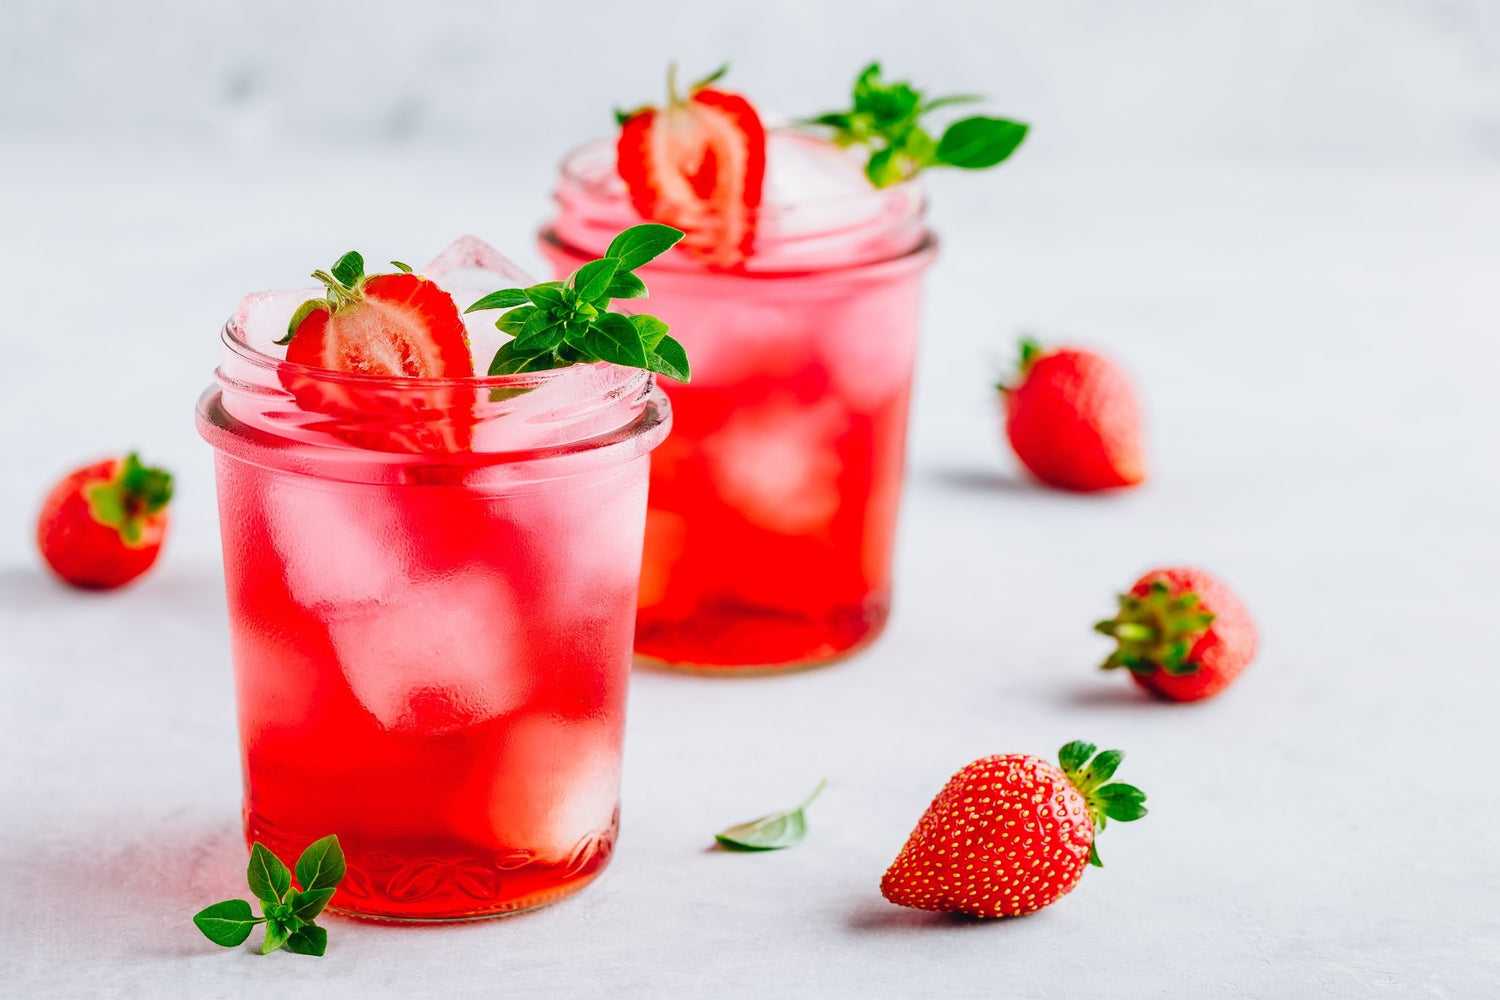 Sip into Spring with This Scrumptious Strawberry Green Tea Cooler - Loose Leaf Tea Market